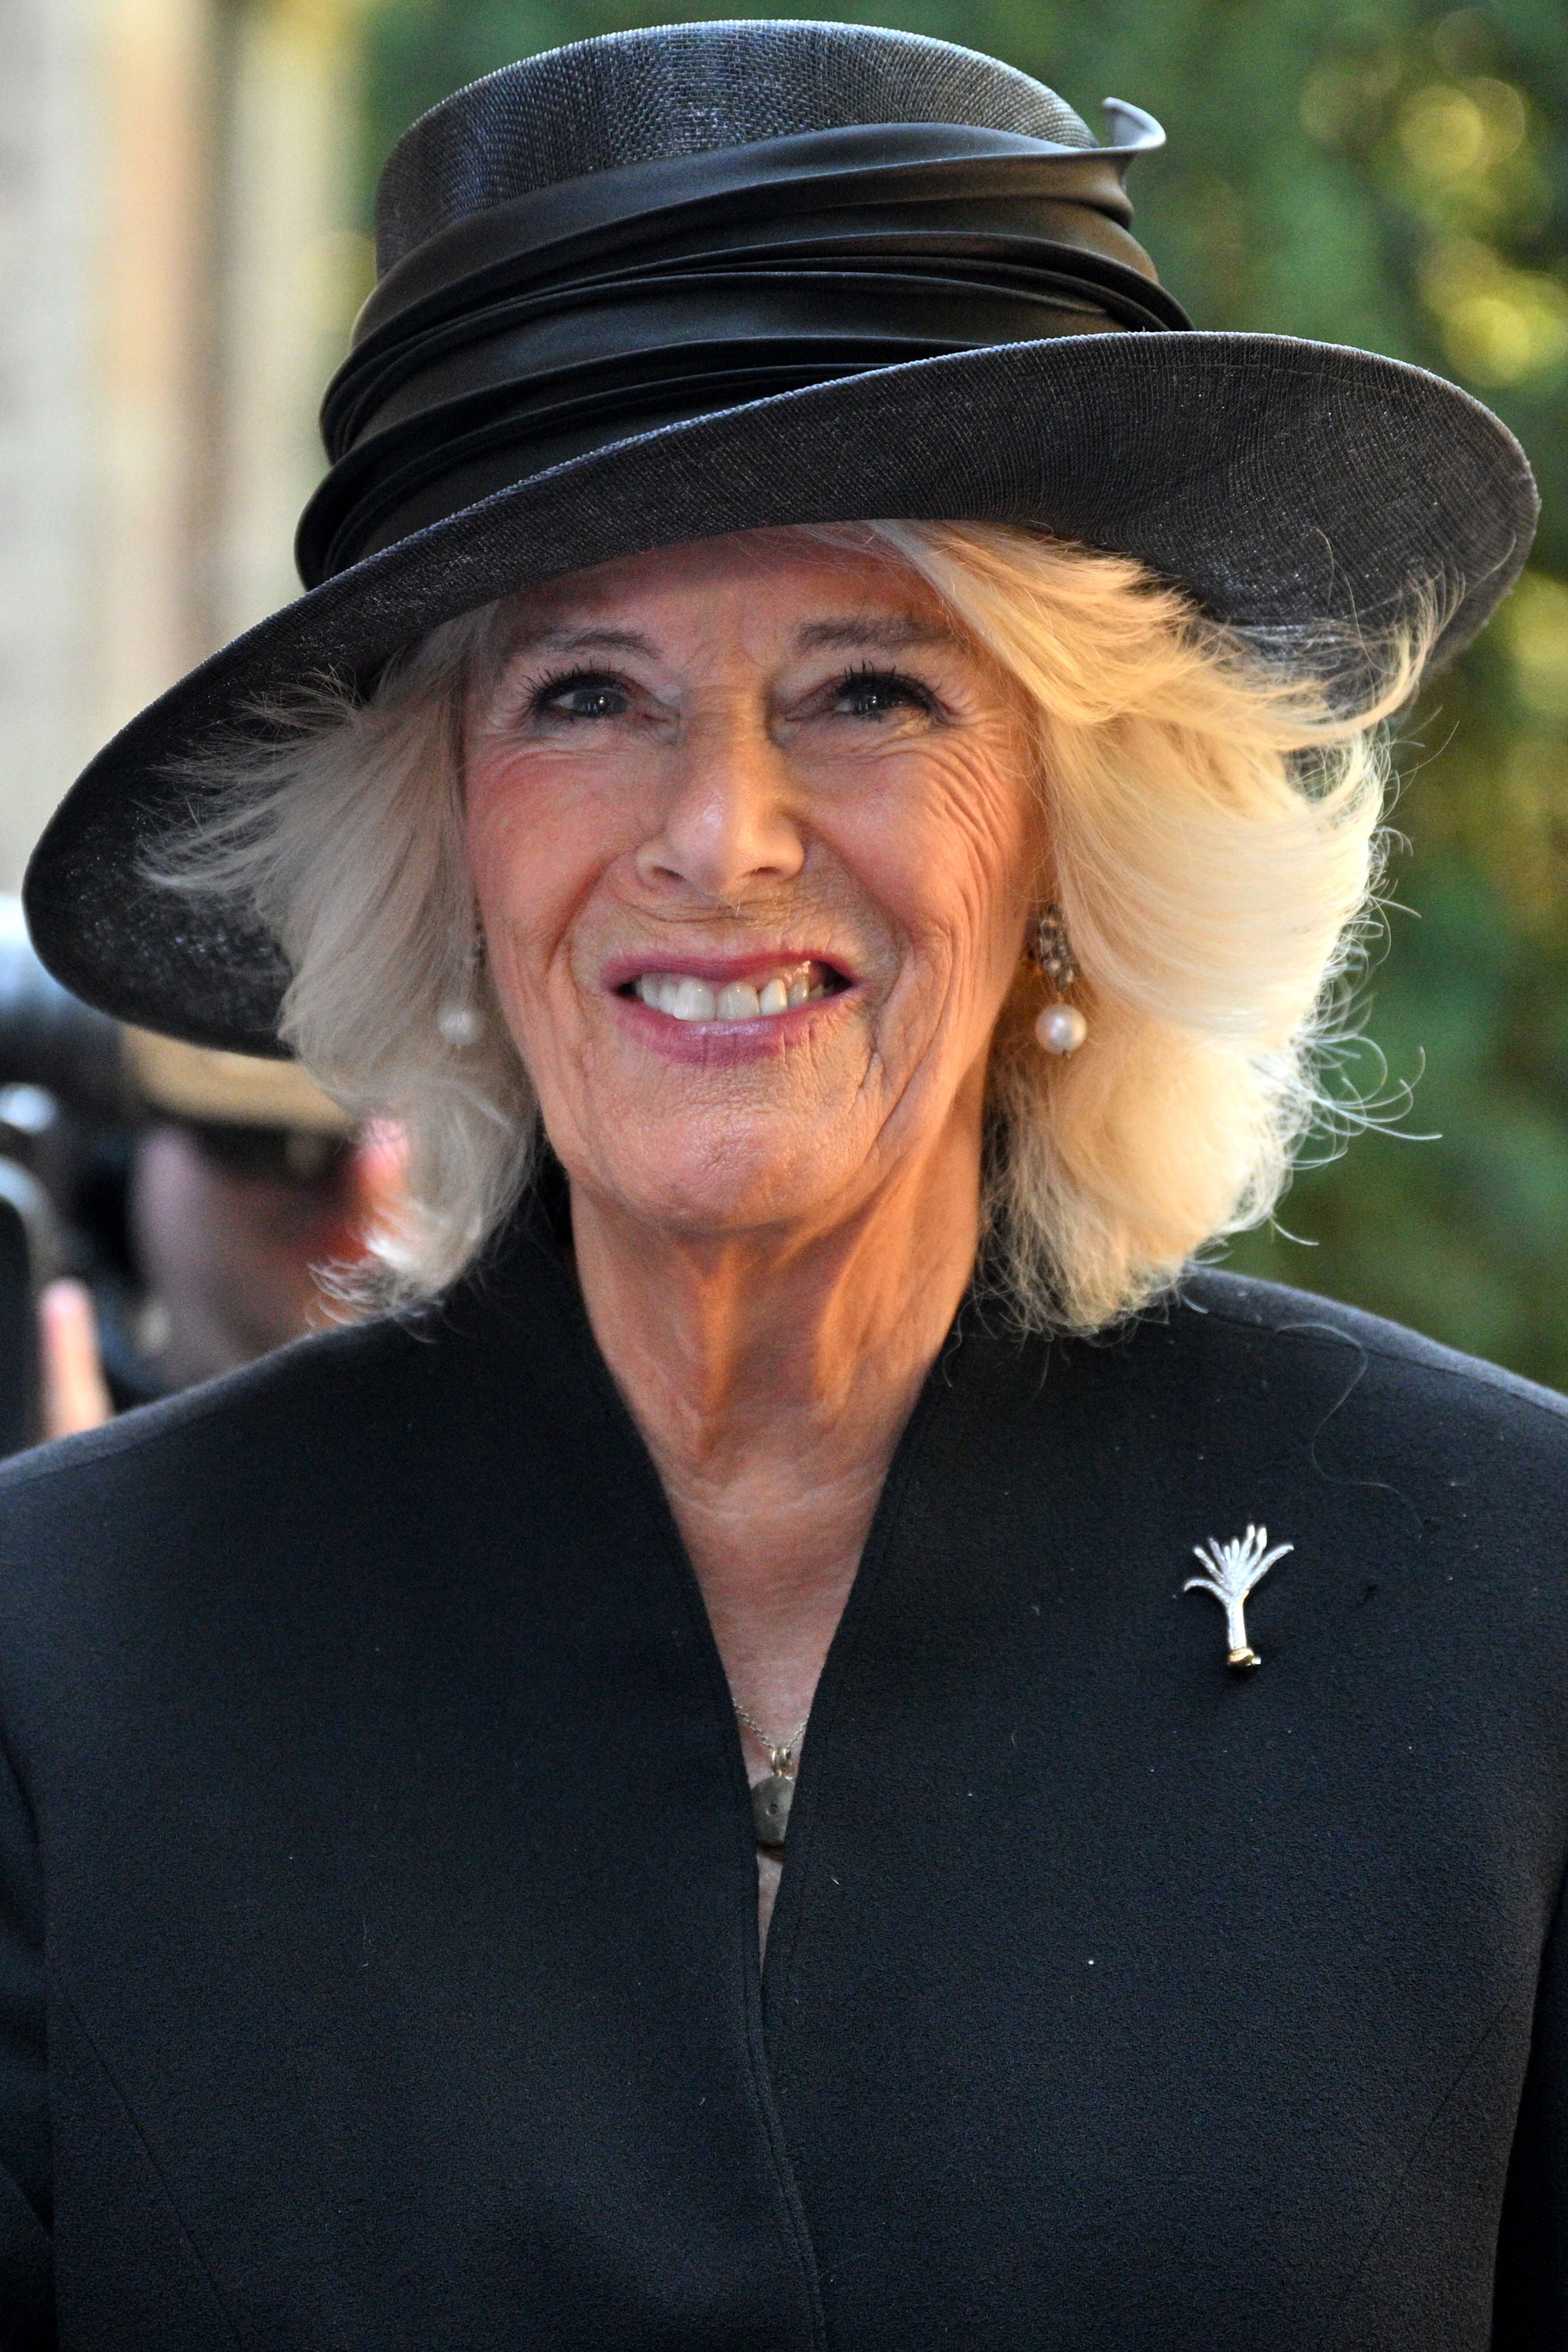 <p>Camilla, Queen Consort attended a Service of Prayer and Reflection for the life of Queen Elizabeth II at Llandaff Cathedral in Cardiff, Wales, on Sept. 16, 2022. On the visit -- which concluded her tour of the four nations of the U.K. alongside husband King Charles III following the death of the queen on Sept. 8 -- Camilla wore a diamond brooch in the shape of a leek, a national symbol of Wales, which is a replica of the late queen's Welsh Guards Leek Brooch.</p>